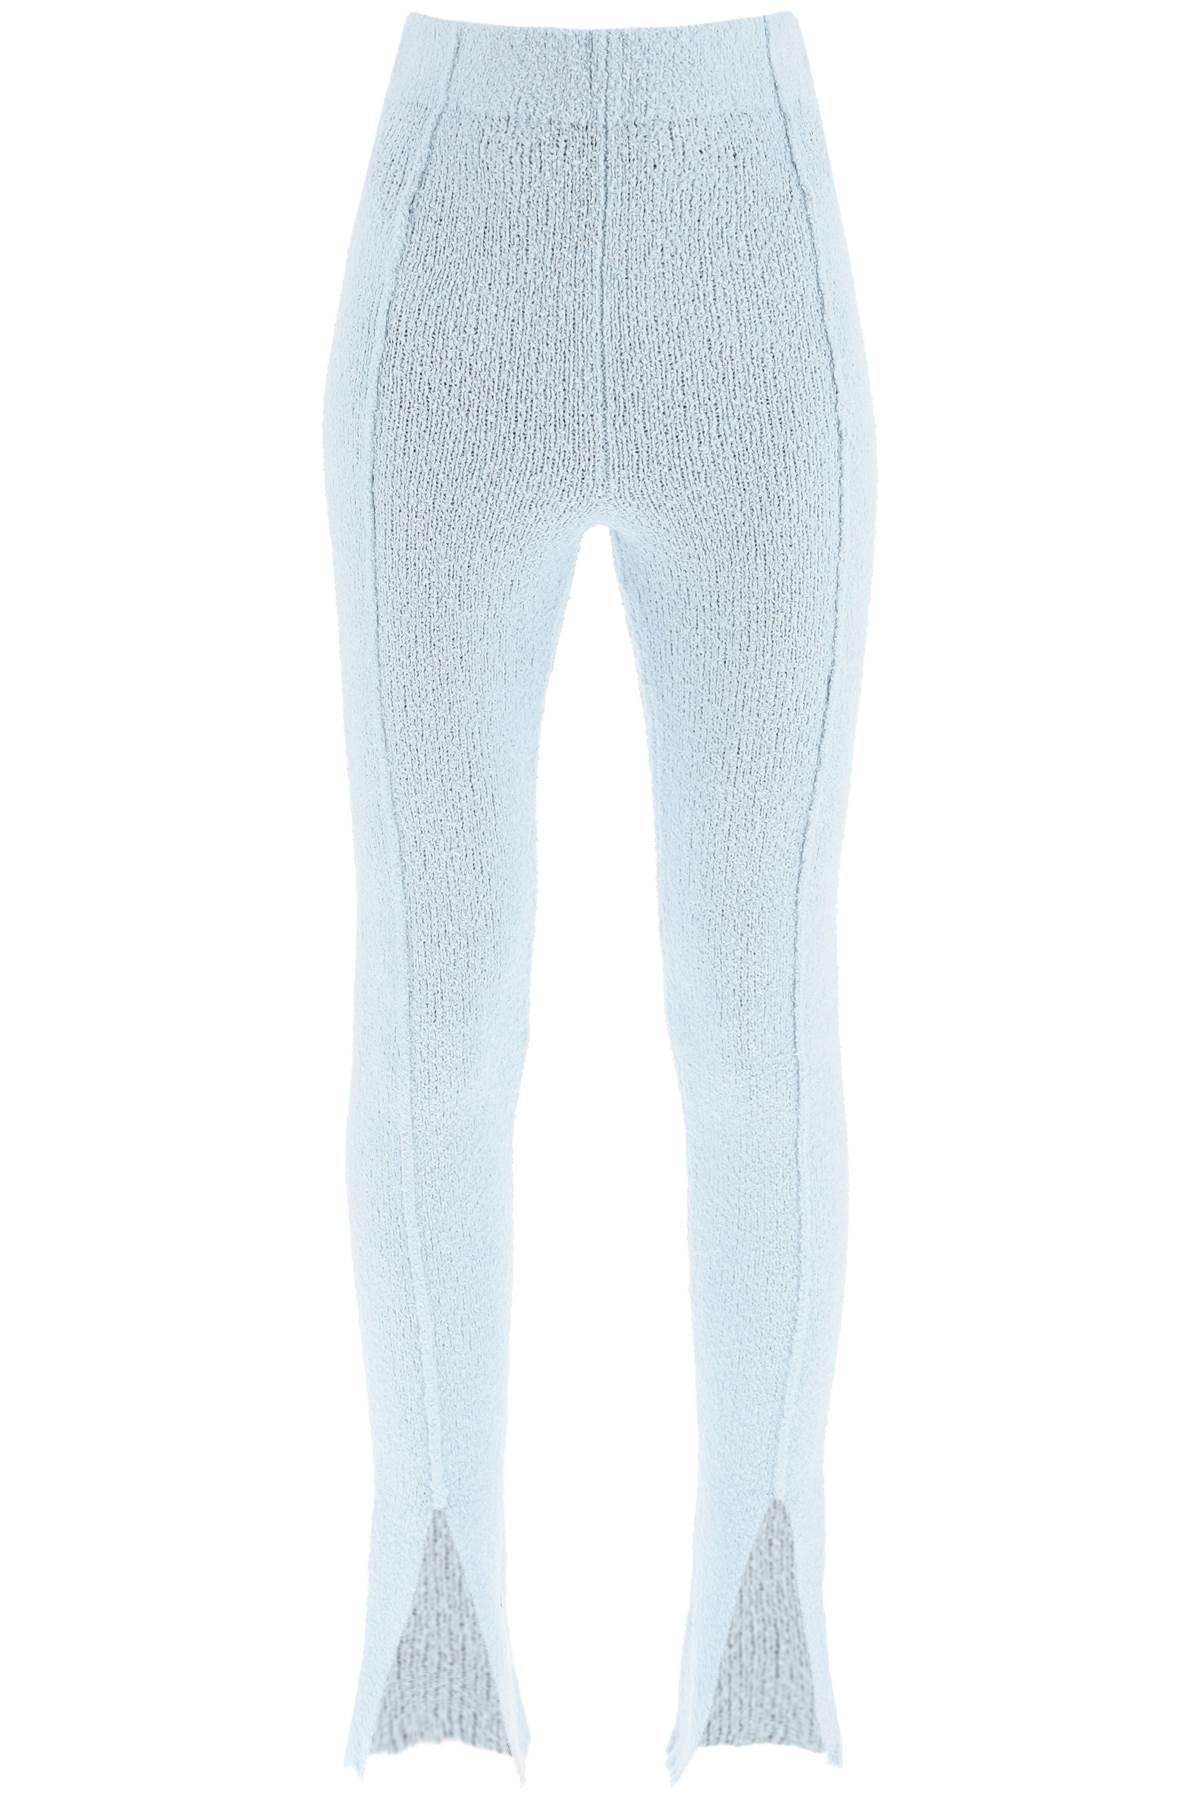 ROTATE 'ALICIANA' BOUCLÉ KNITTED LEGGINGS